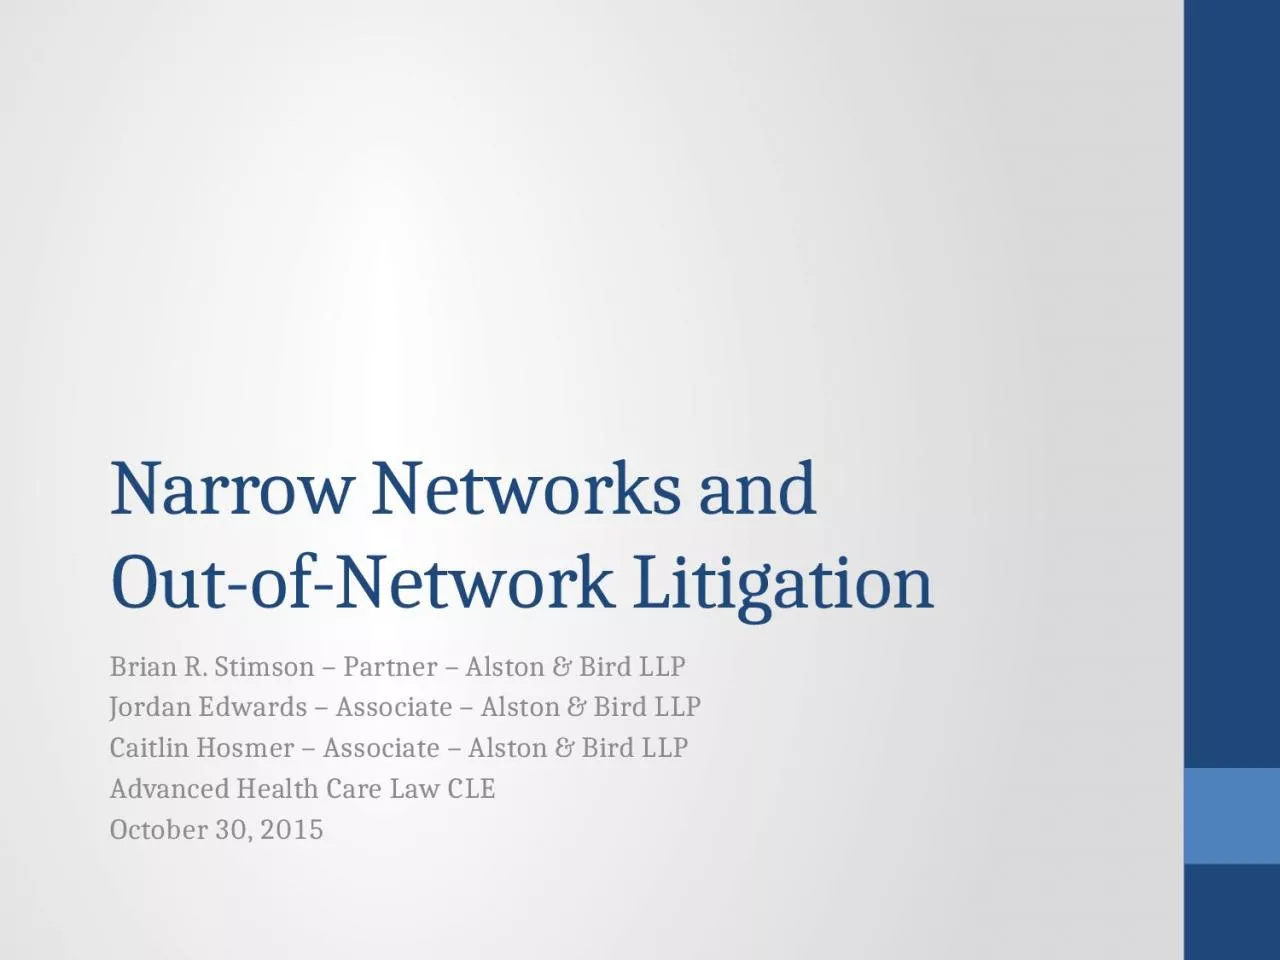 Narrow Networks and Out-of-Network Litigation